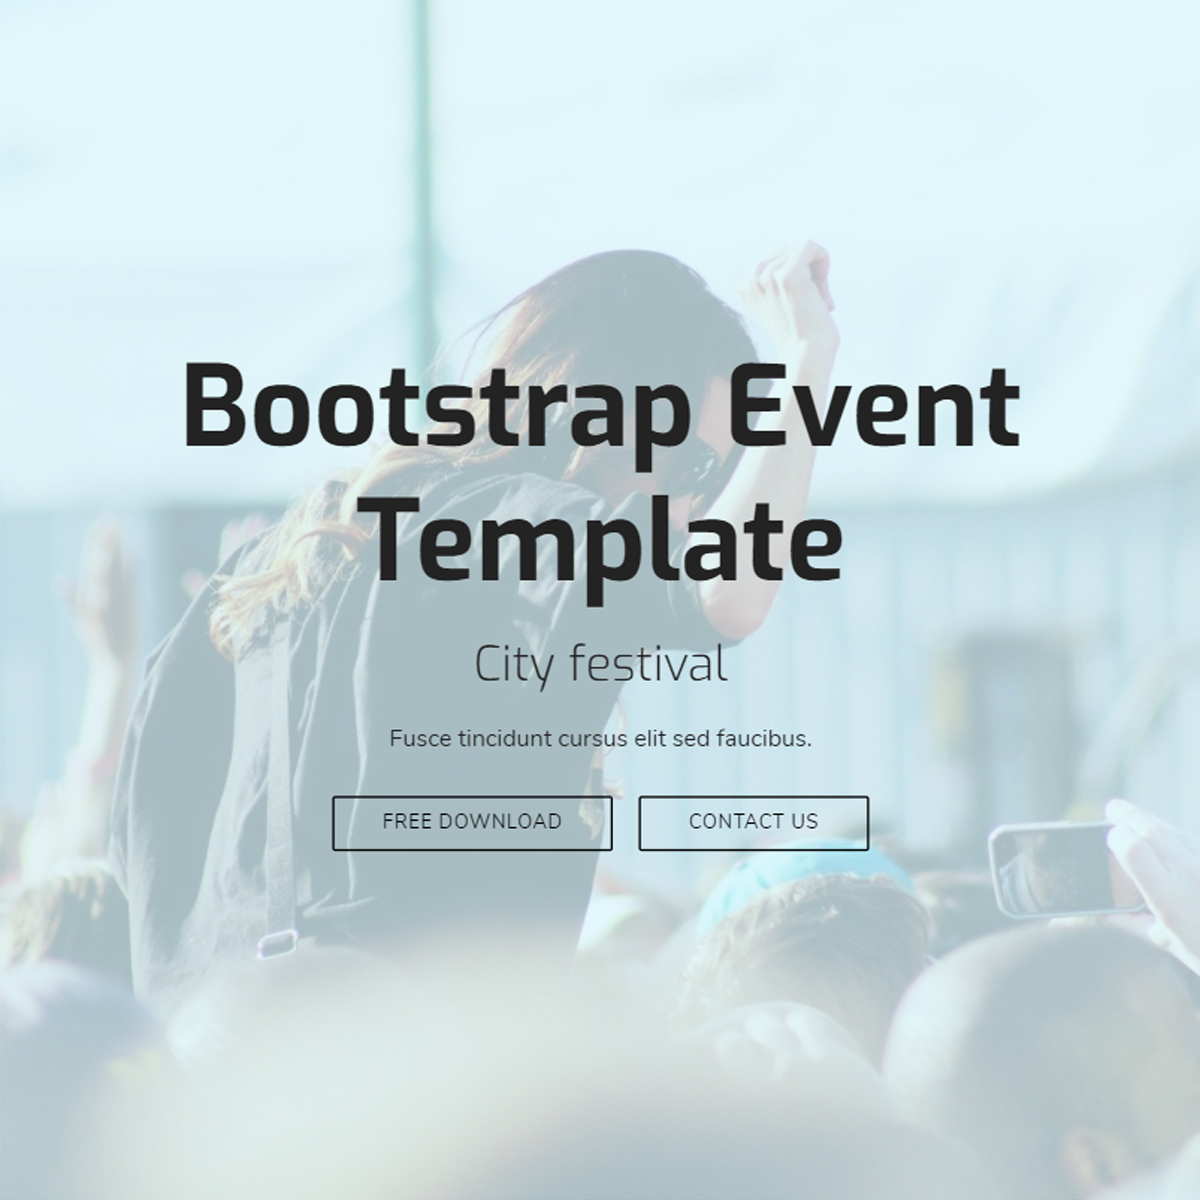 HTML Bootstrap Event Templates